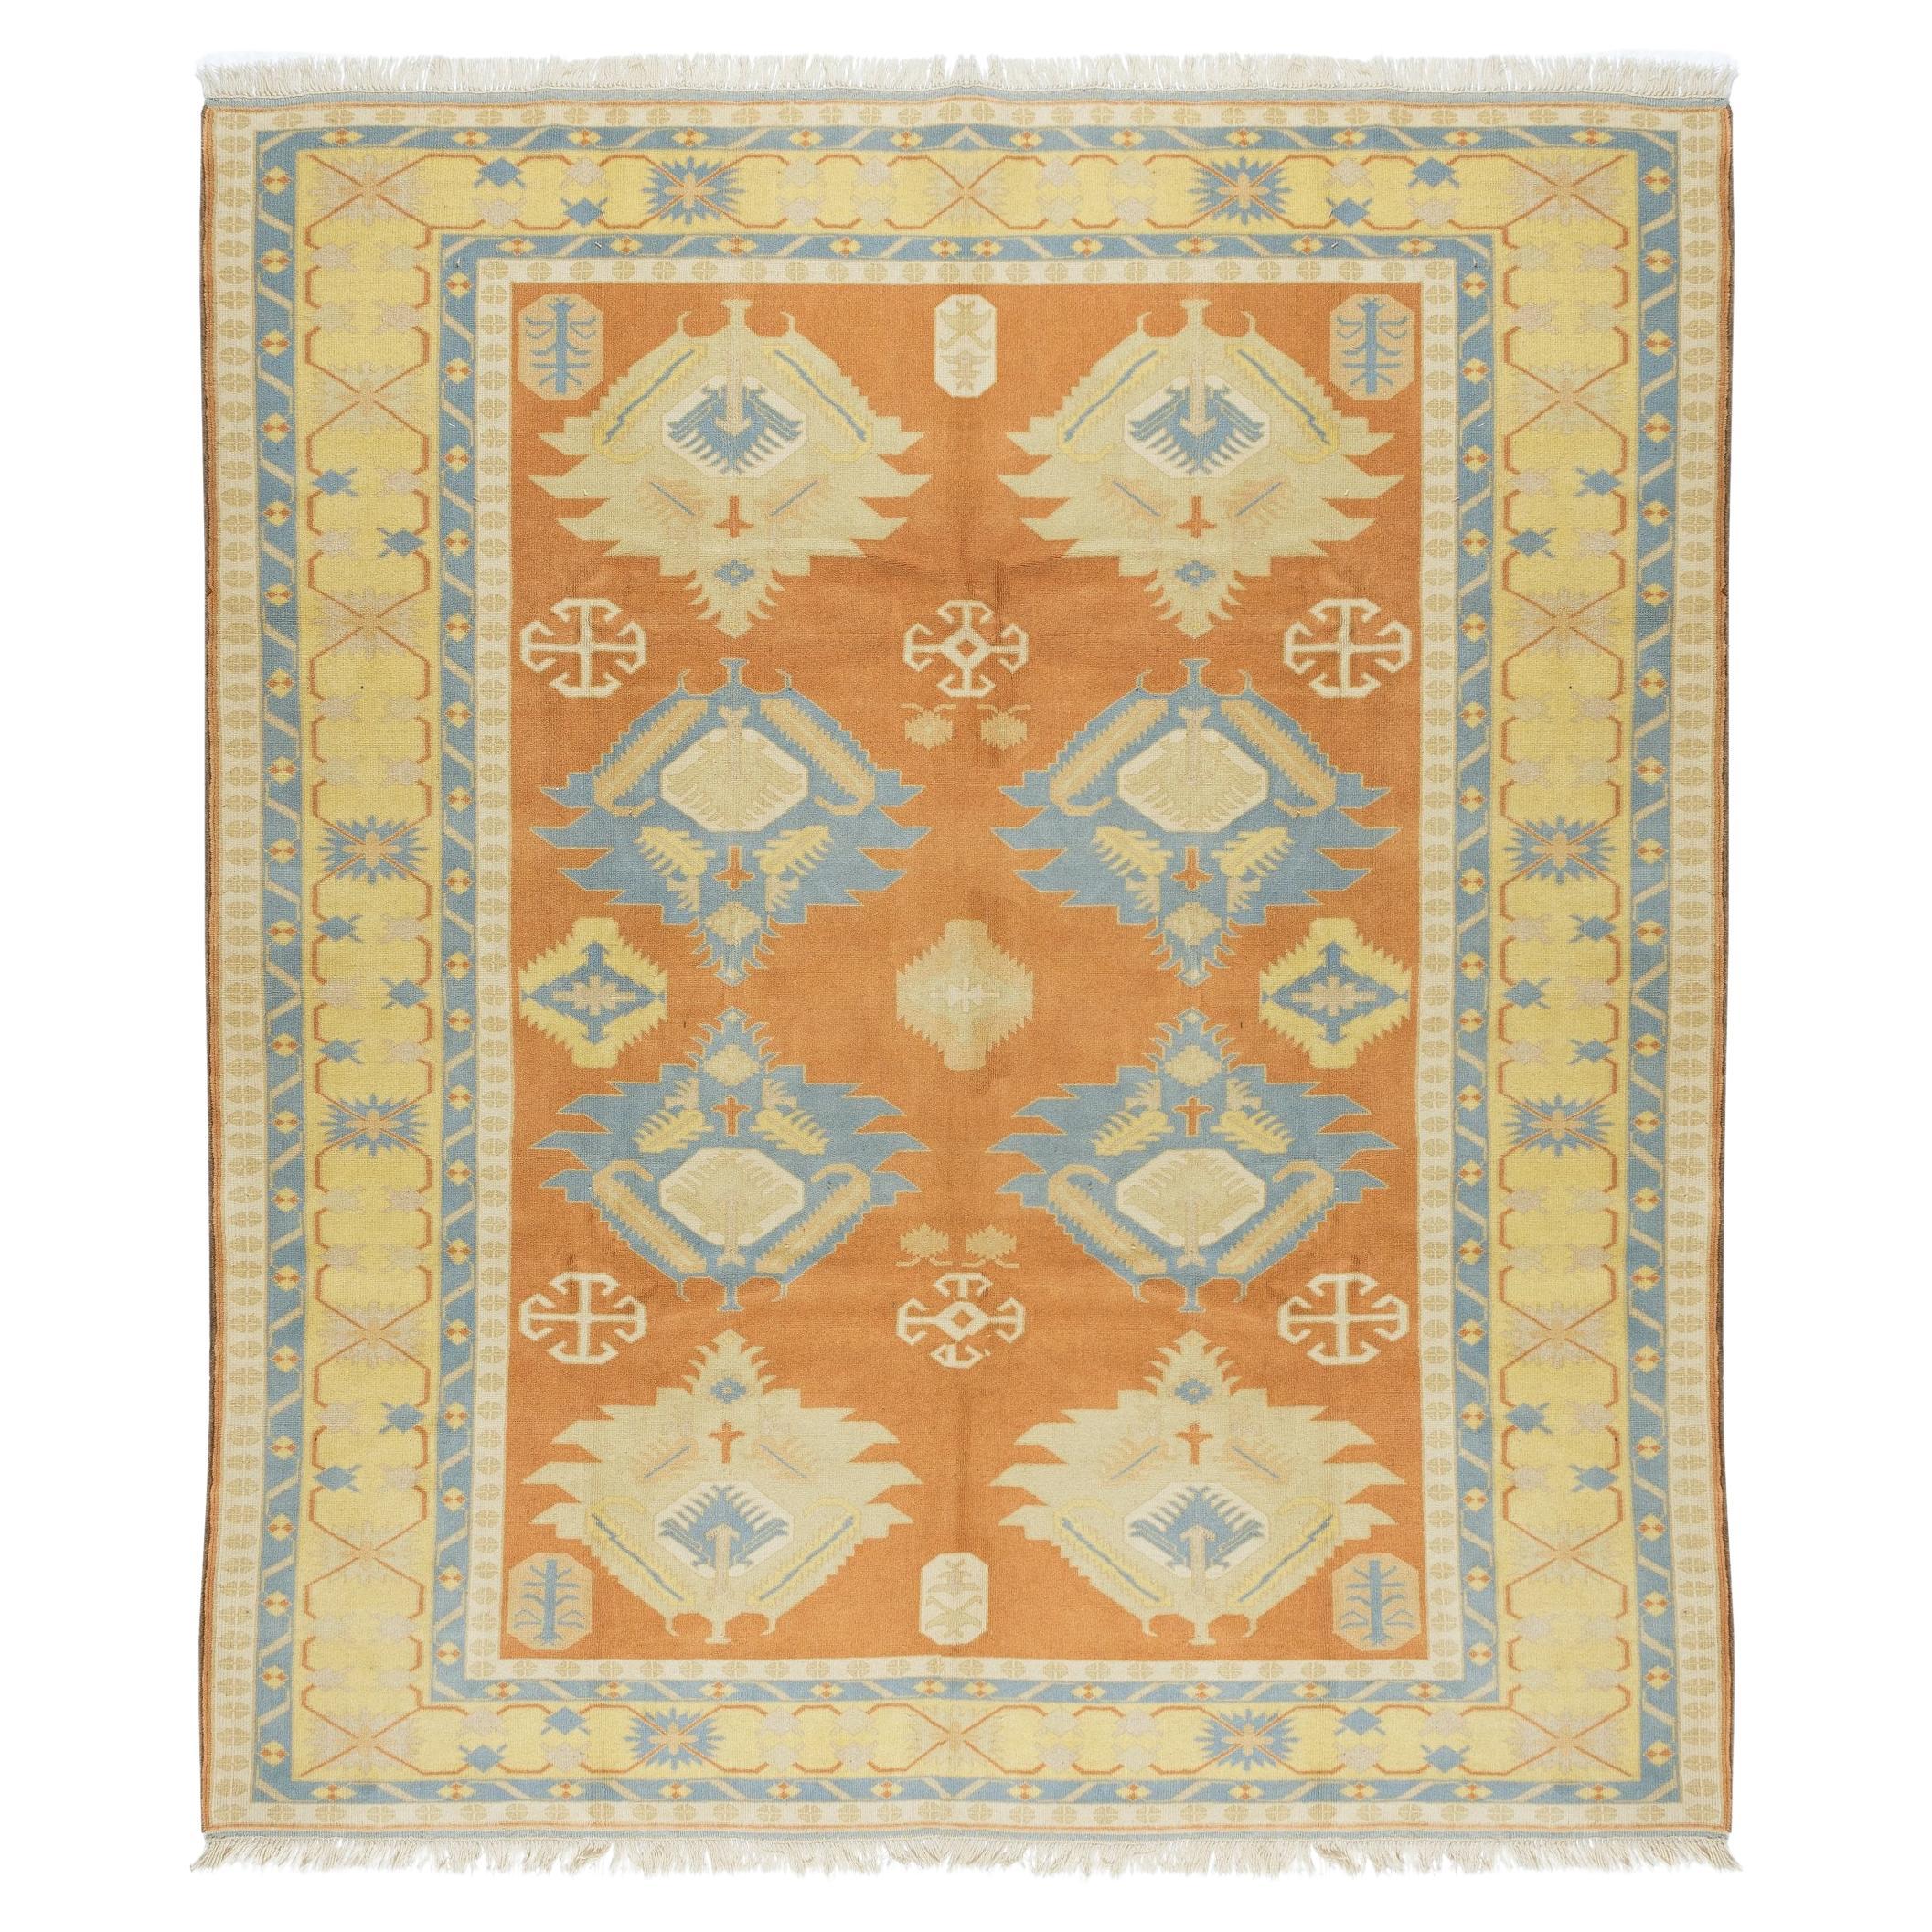 8.4x10 Ft Unique Turkish Geometric Rug, Traditional Vintage Hand Knotted Carpet